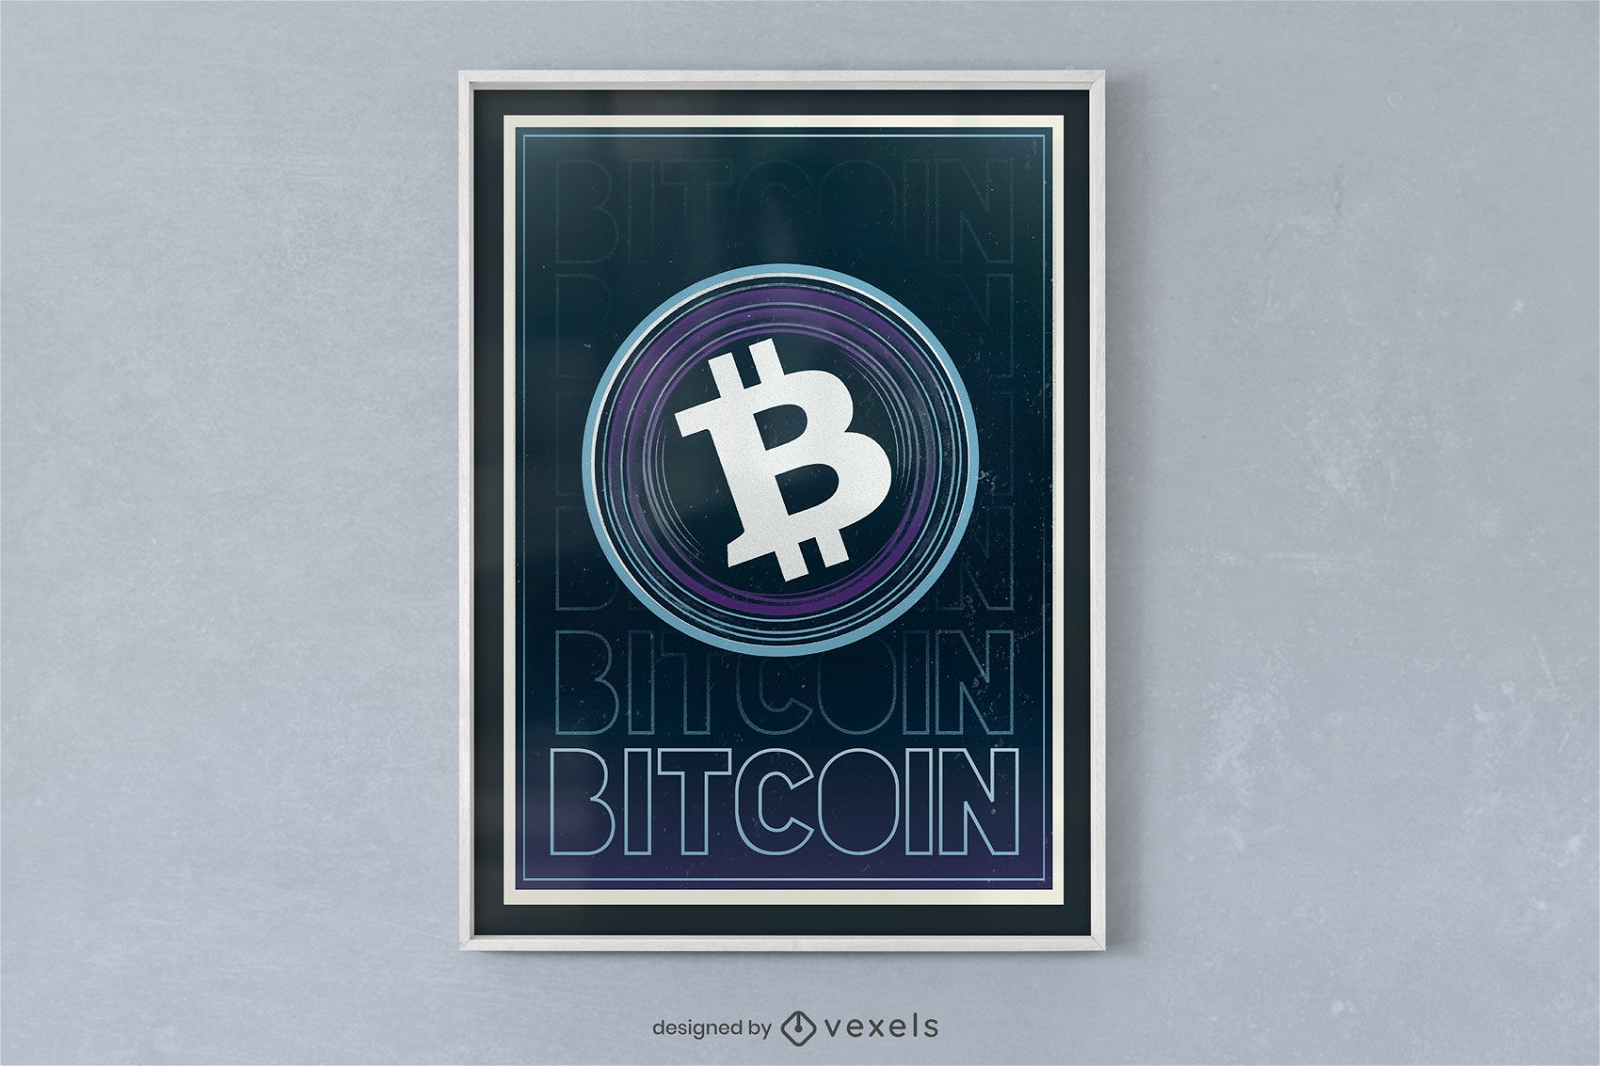 Bitcoin currency poster design